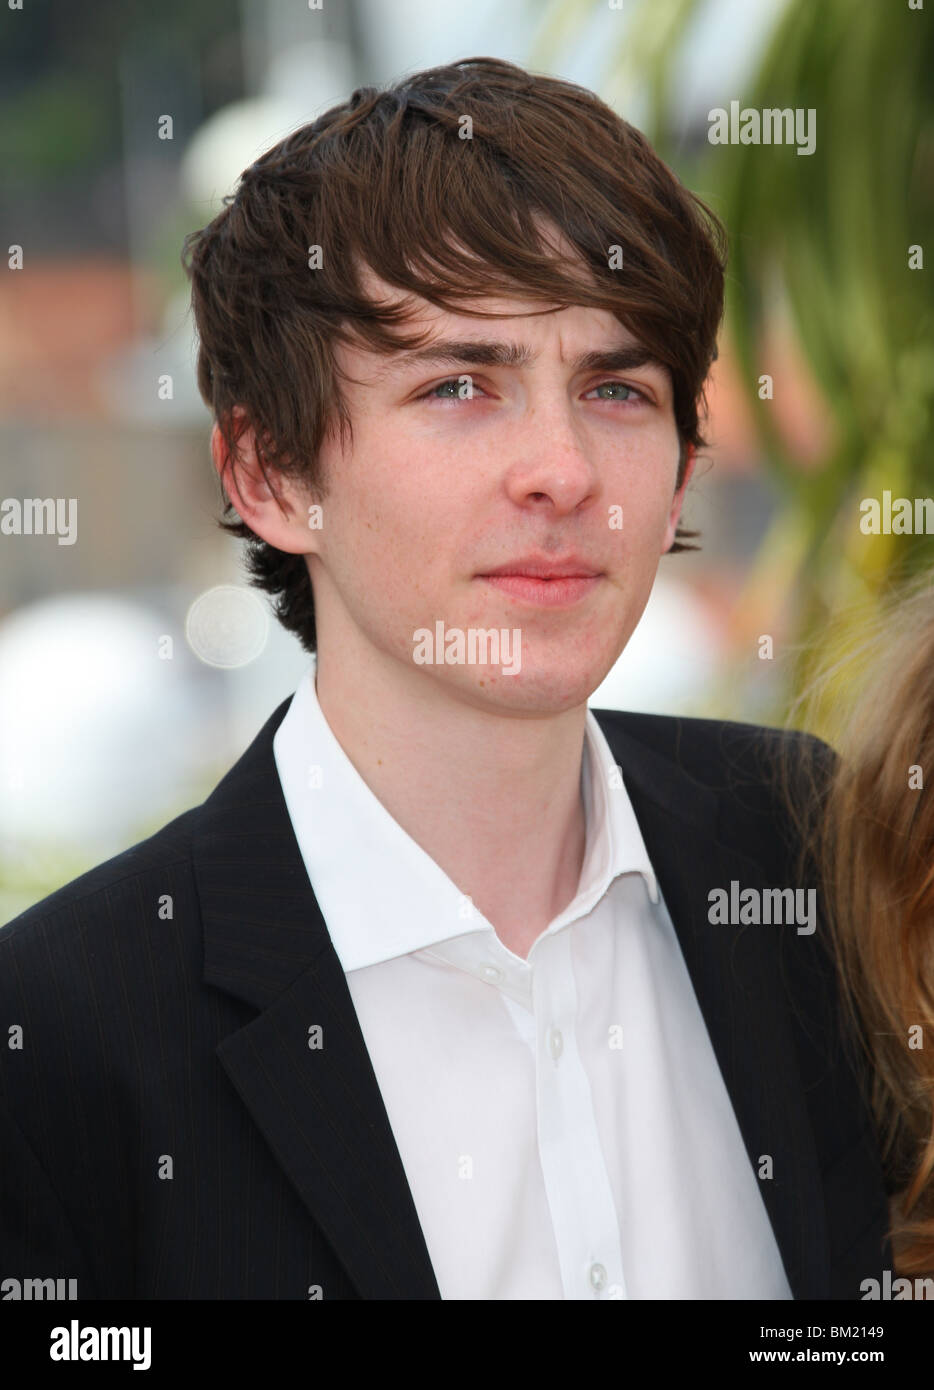 MATTHEW BEARD CHATROOM PHOTOCALL CANNES FILM FESTIVAL 2010 PALAIS DES FESTIVAL CANNES FRANCE 14 May 2010 Stock Photo